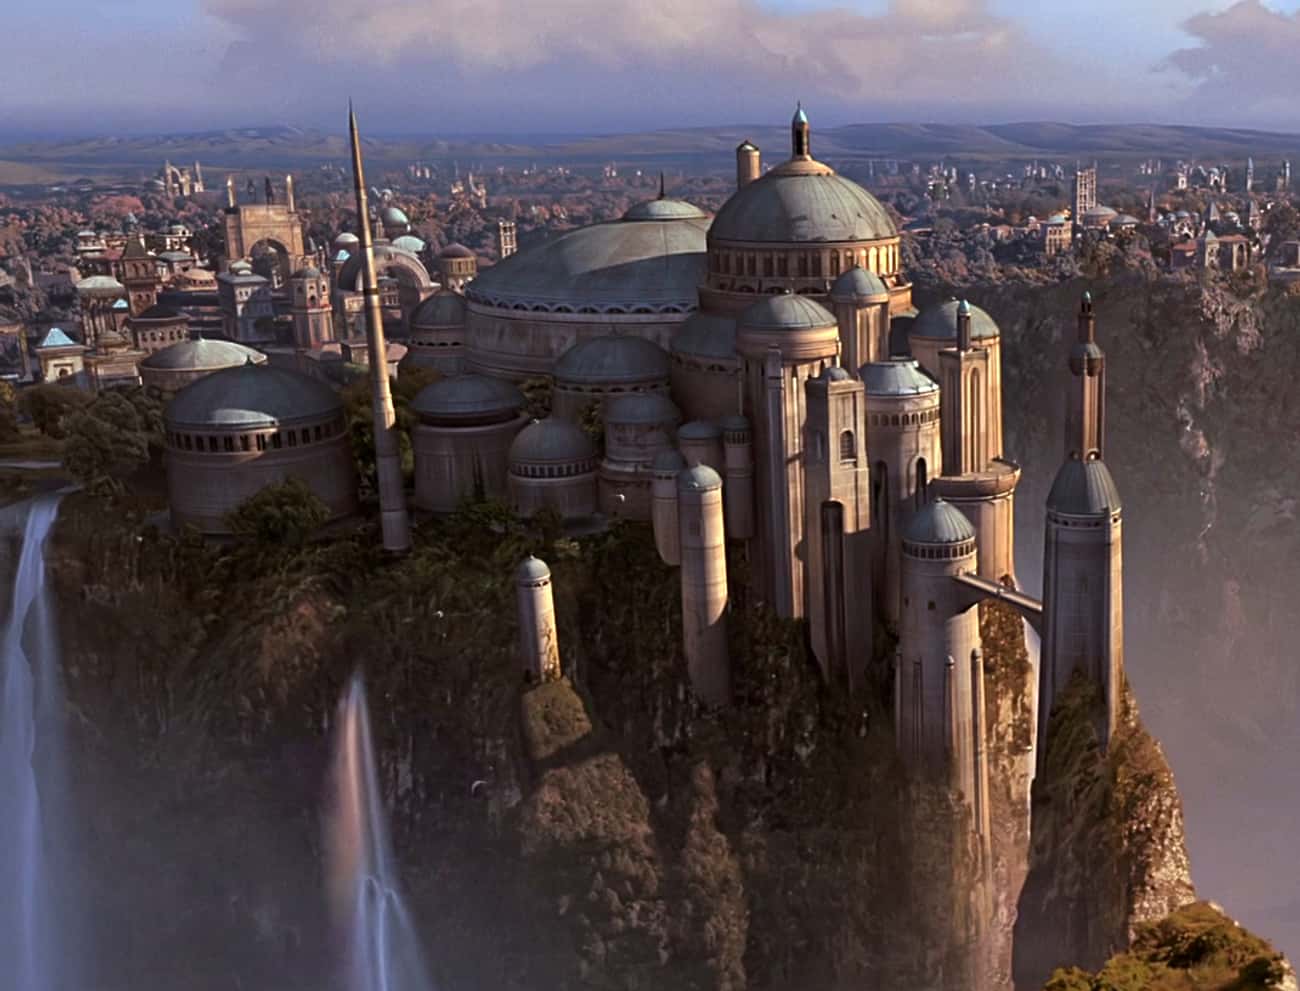 The Waterfalls Near The City Of Theed In ‘Star Wars: The Phantom Menace’ Were Created By Filming Poured Salt